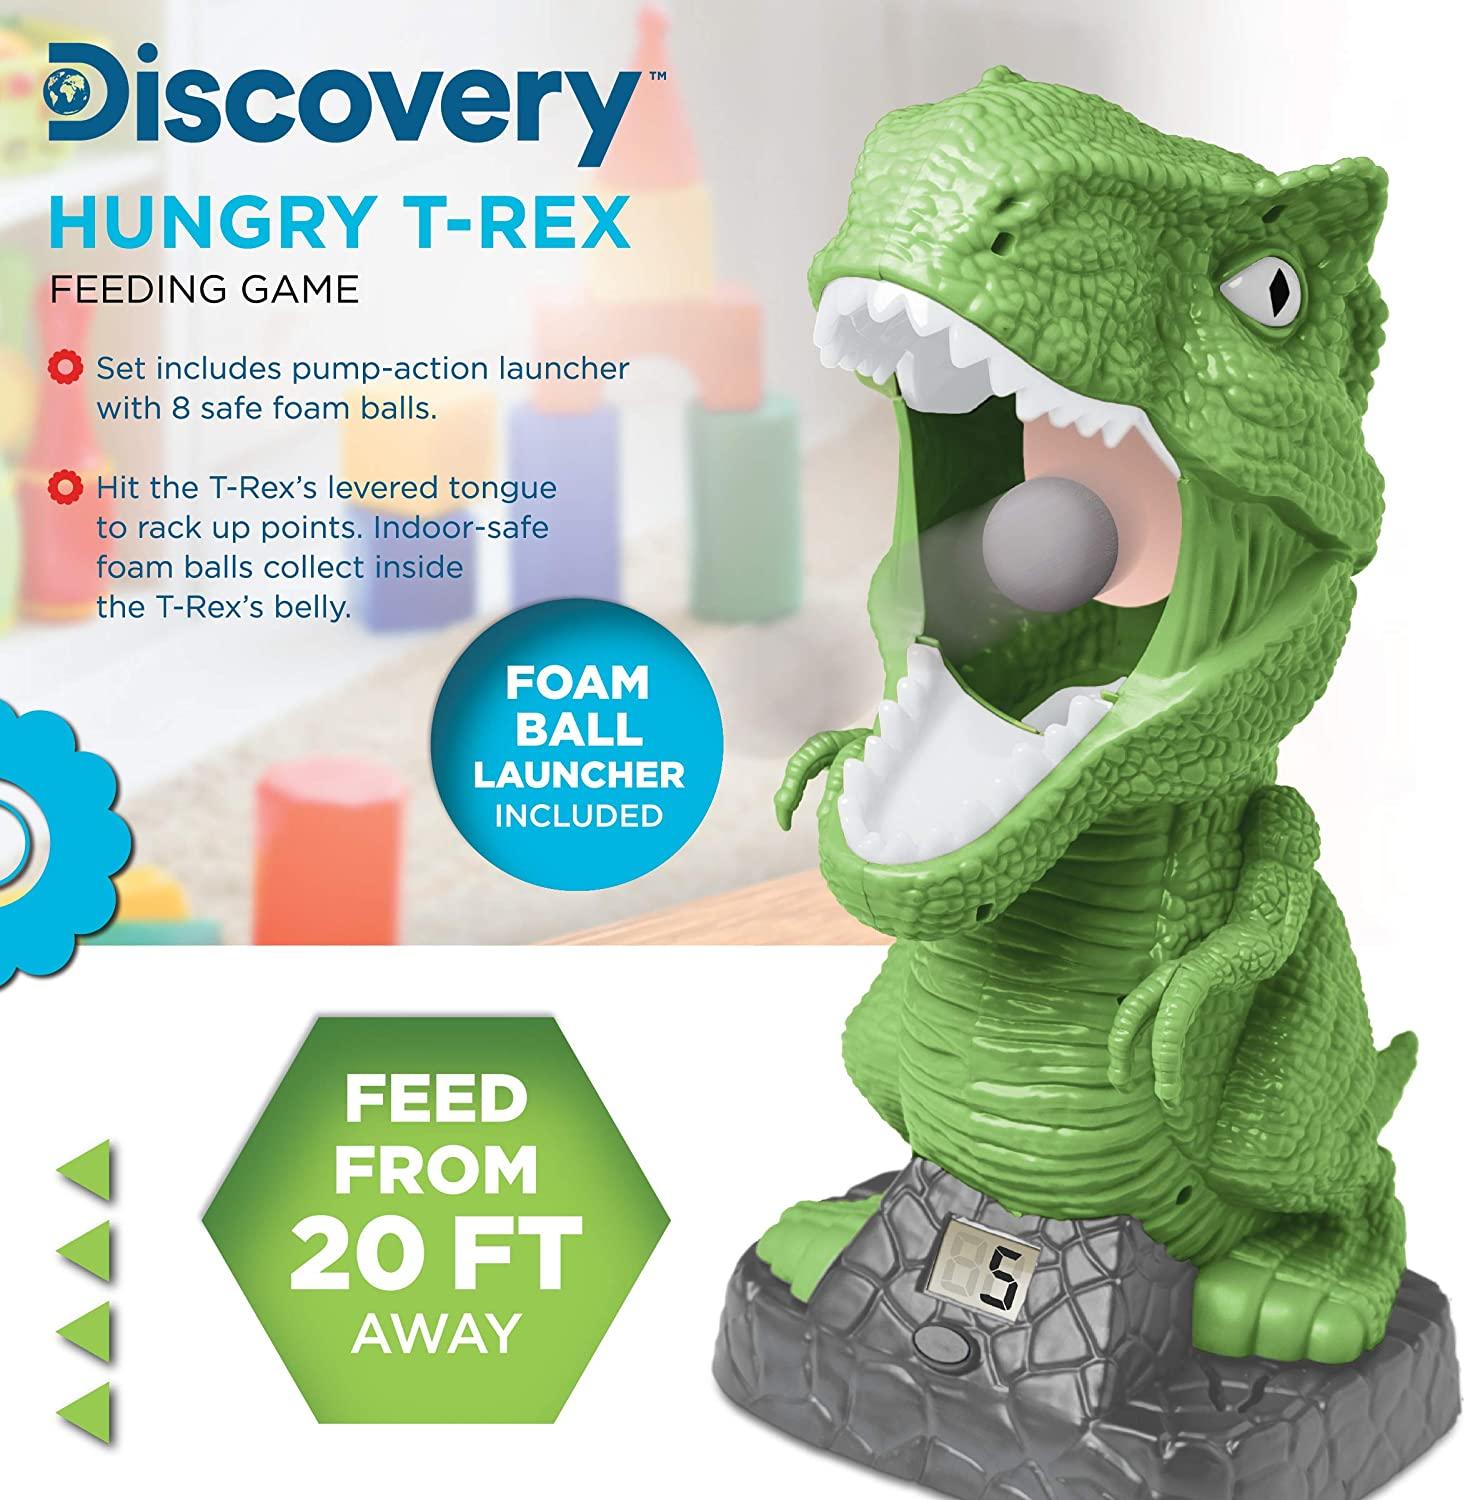 Discovery Hungry T-Rex img 2